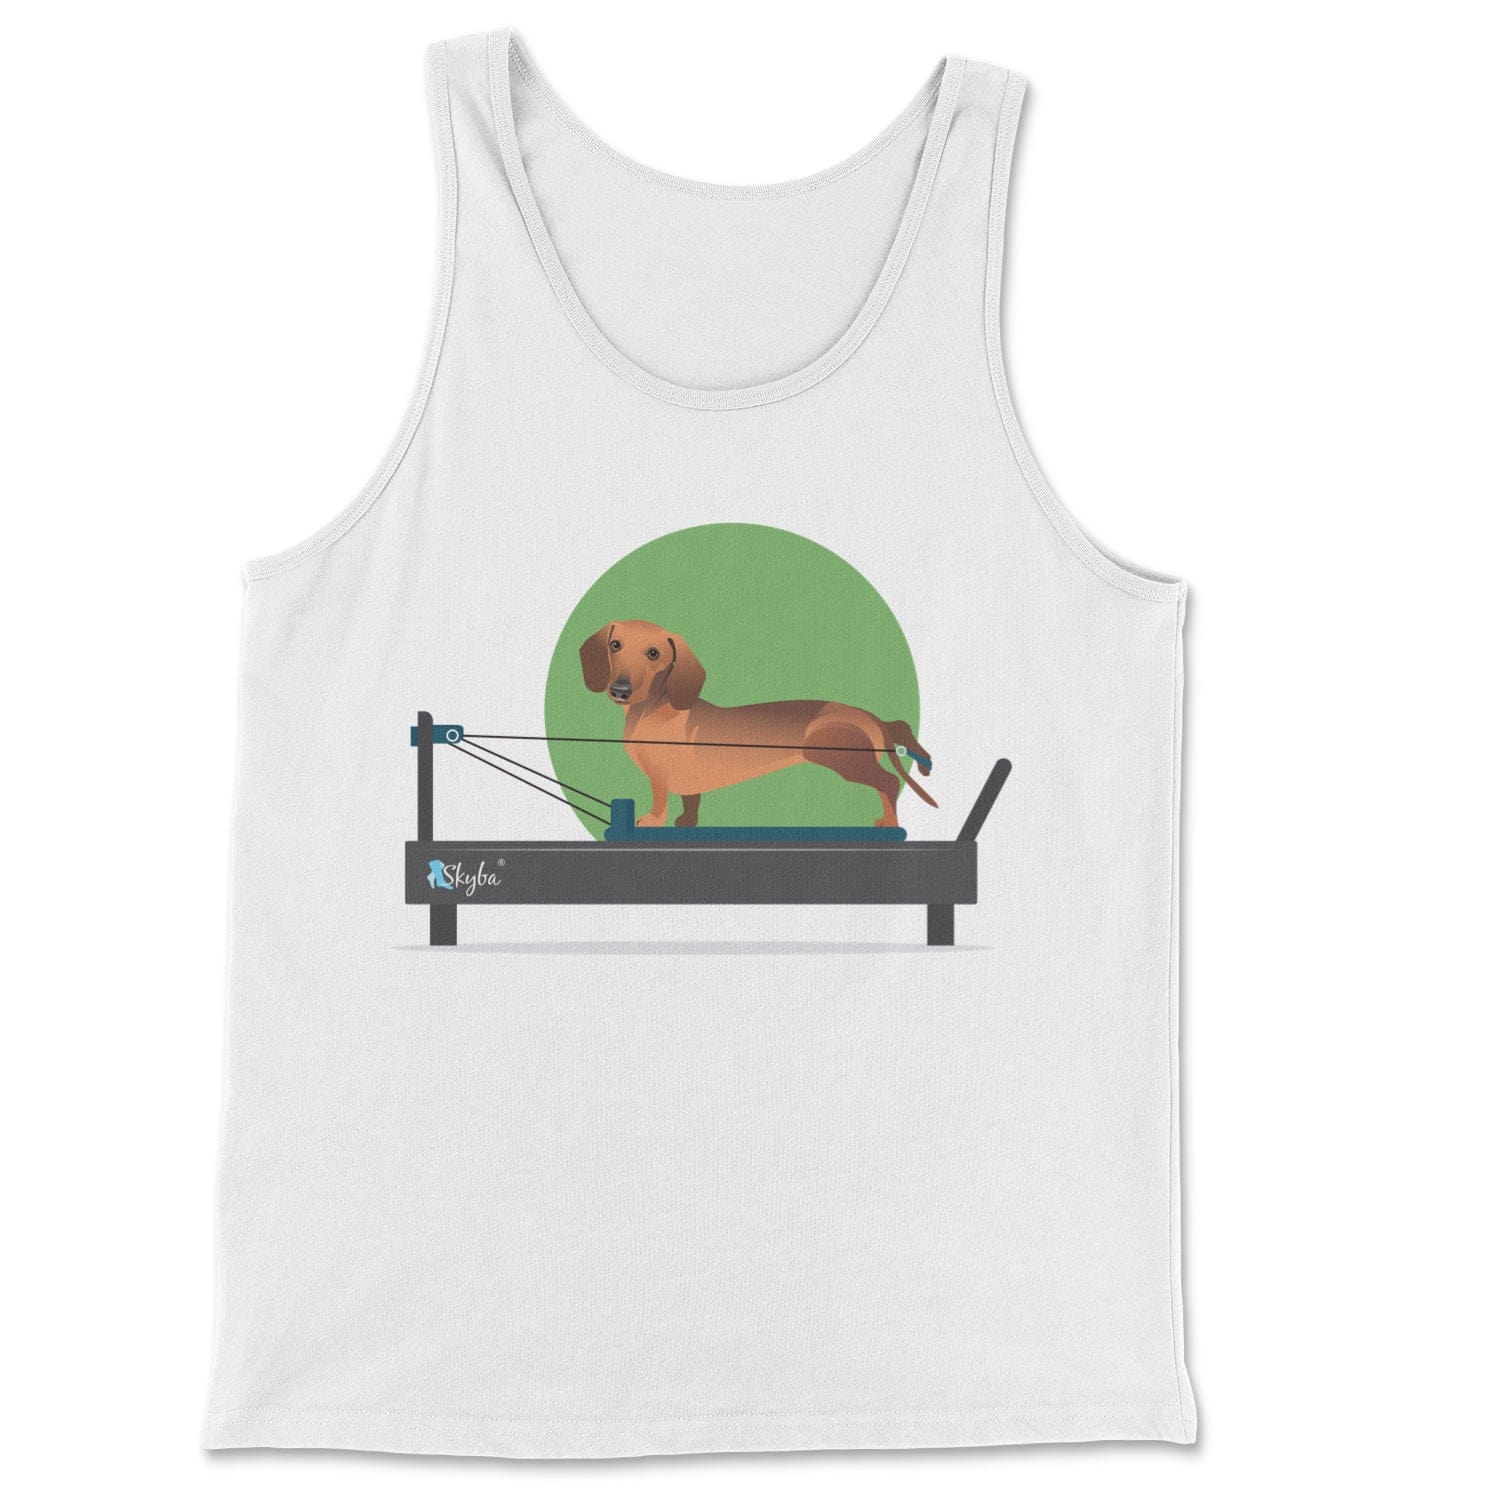 Dachshund on the Reformer - Classic Tank Skyba Print Material